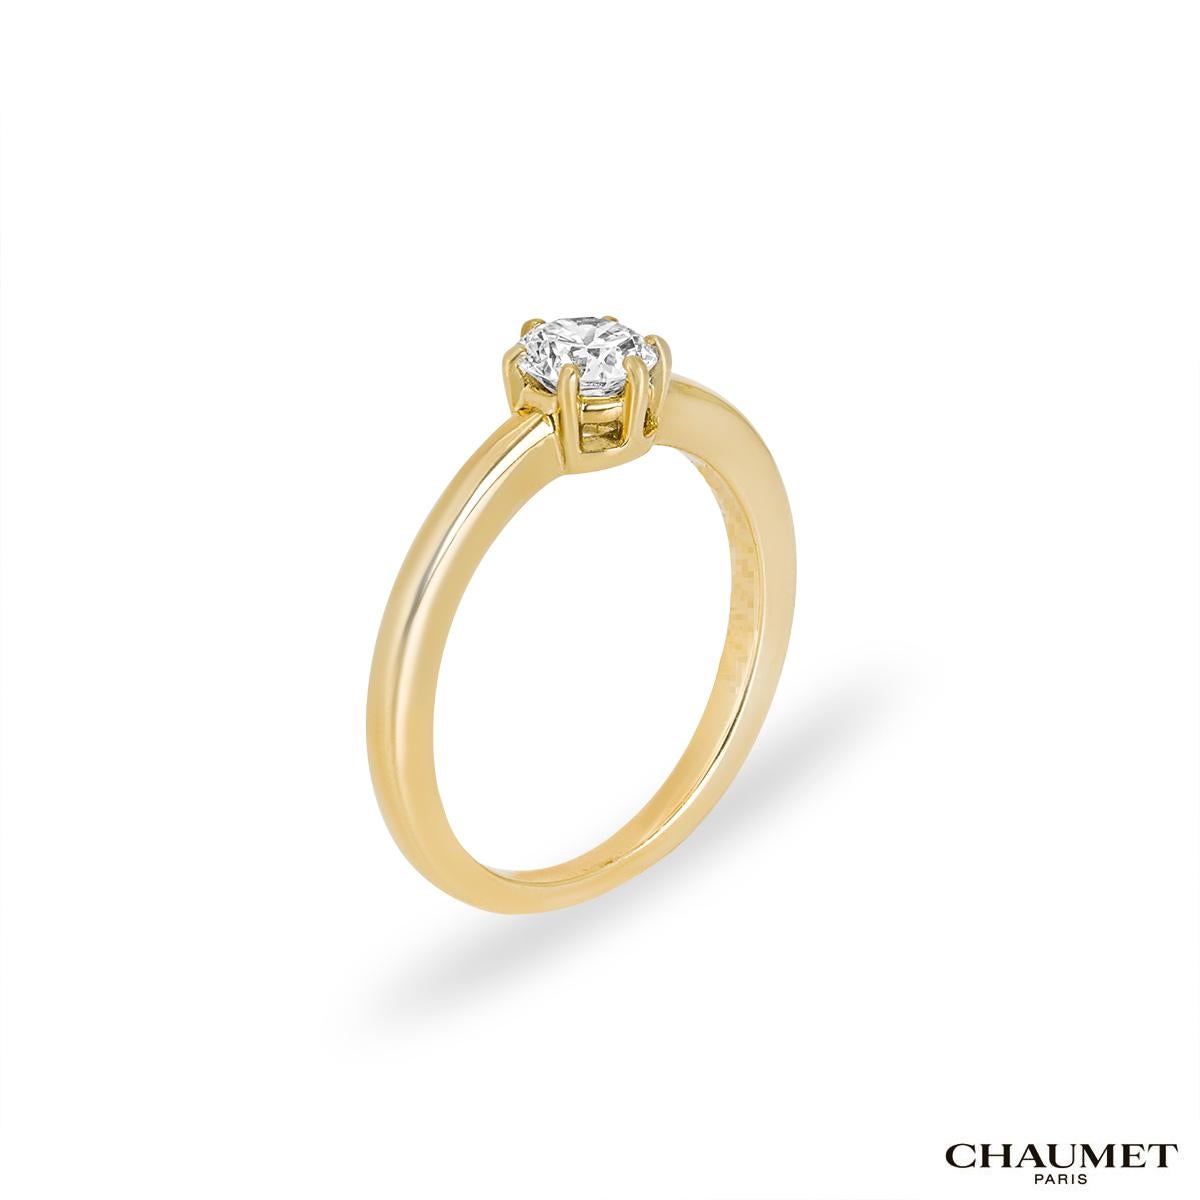 A classic 18k yellow gold diamond engagement ring. The ring comprises of a round brilliant cut diamond set in a 6 claw setting weighing approximately 0.44ct, G colour and VS clarity. The ring is currently a size UK K, EU 50 and US 5 1⁄4 but can be